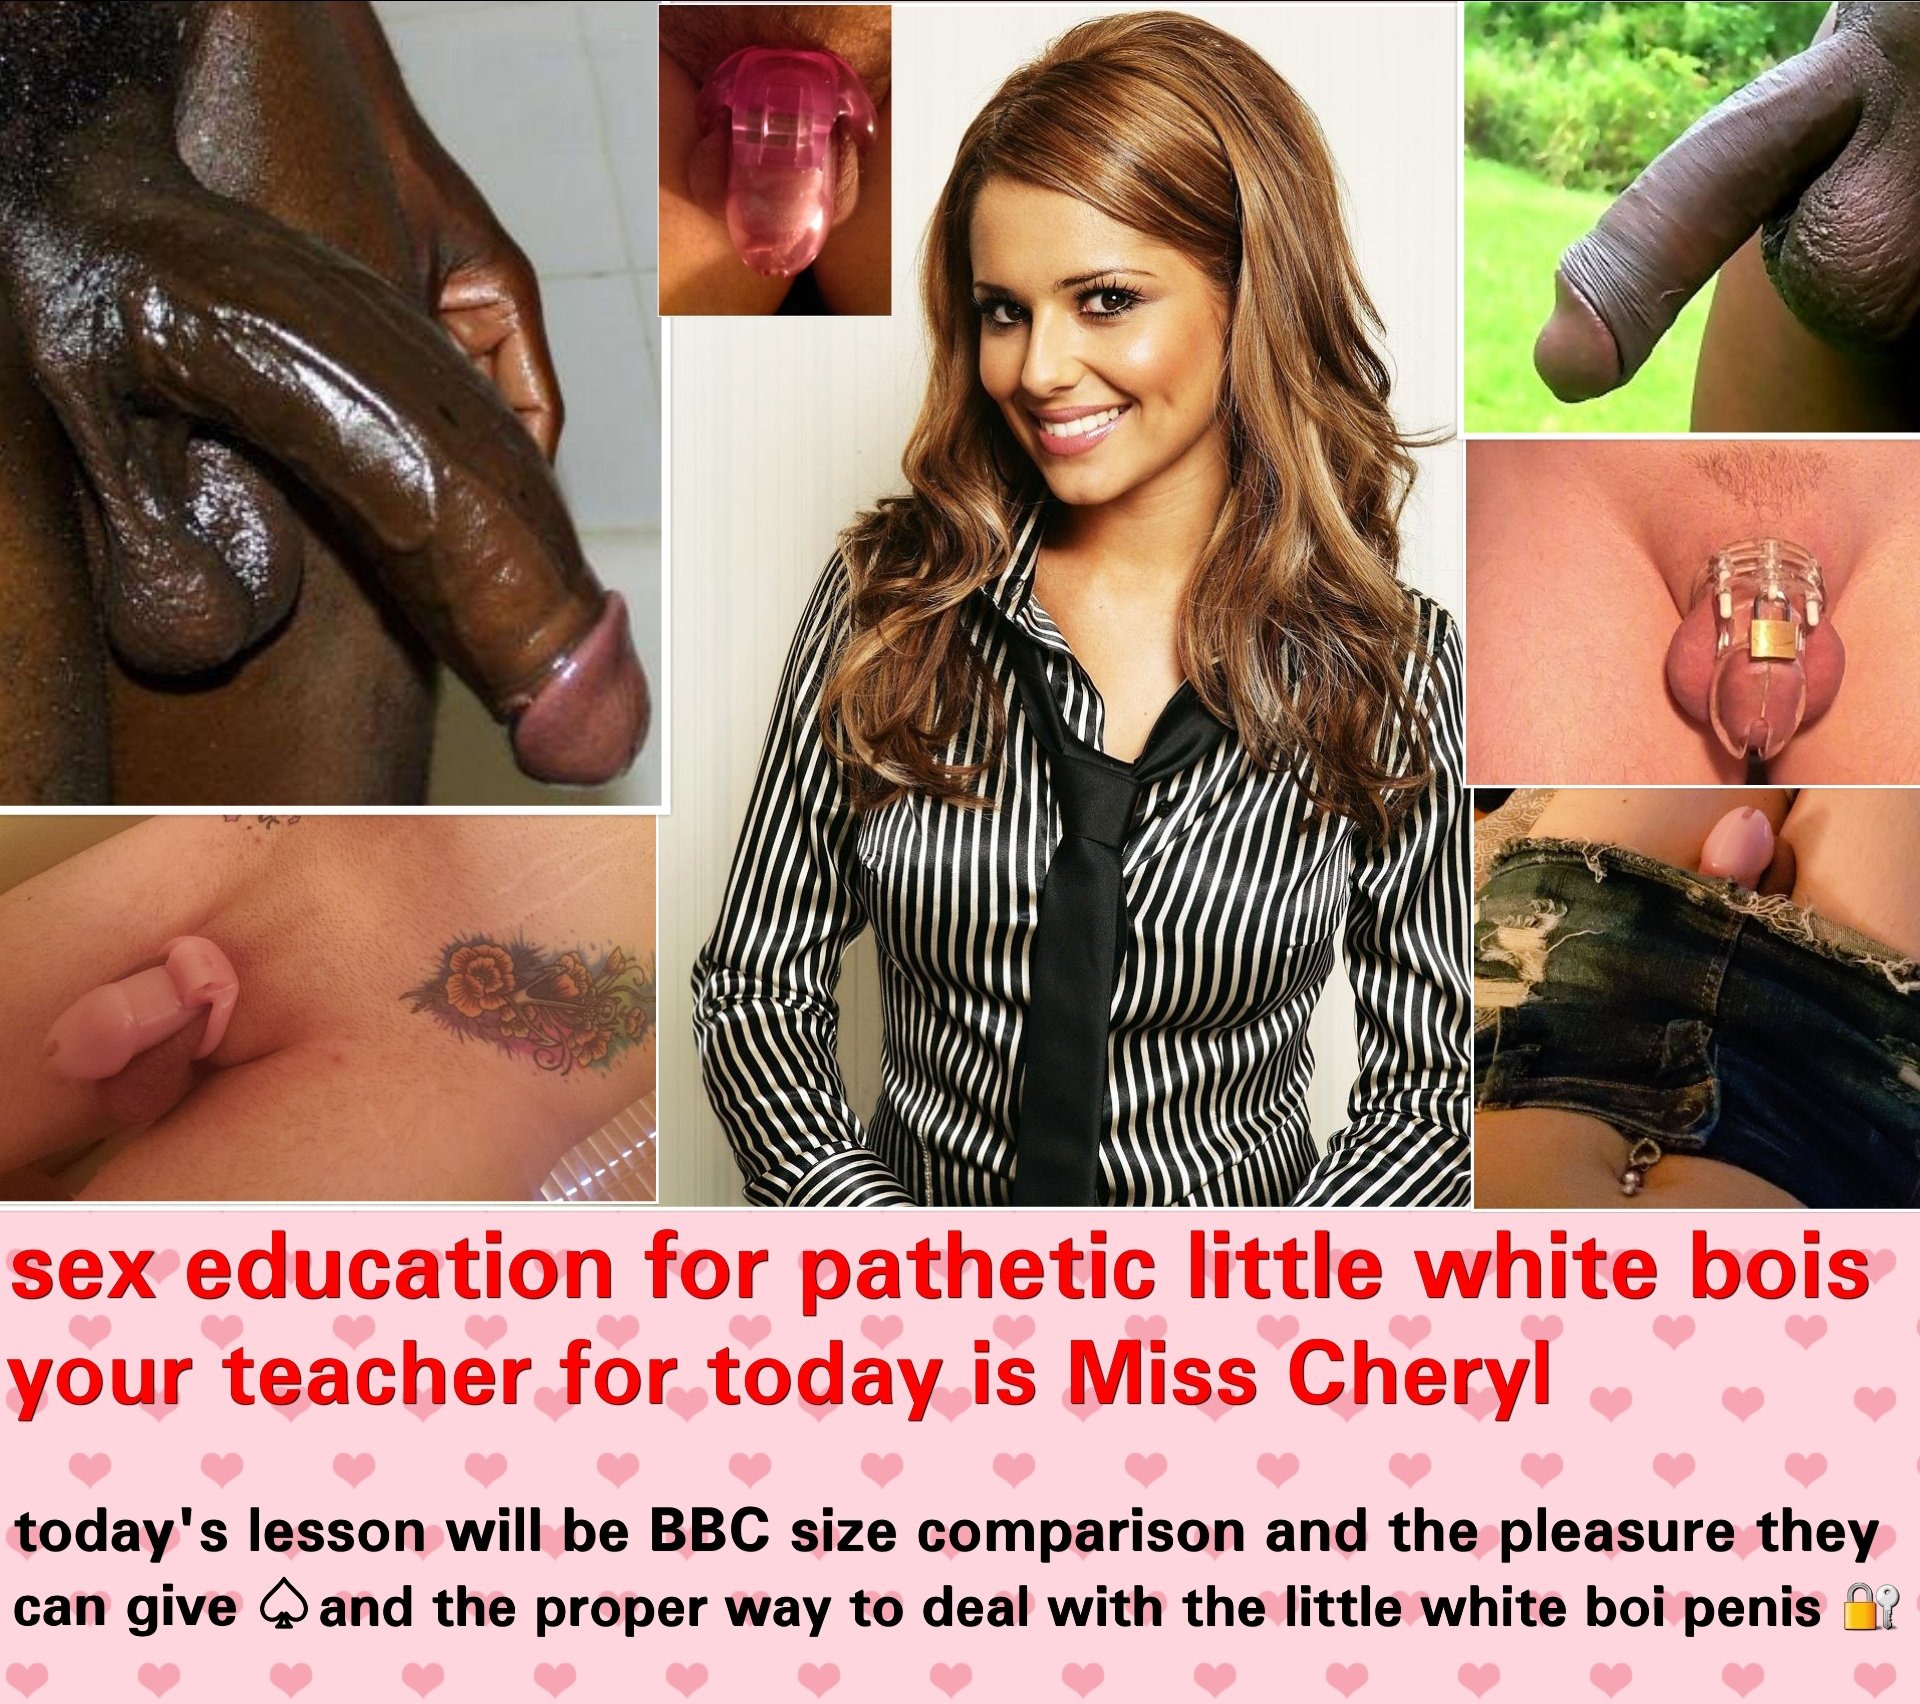 “Mandatory sex education in the #NWBO at the Beta Male School of Higher Lea...